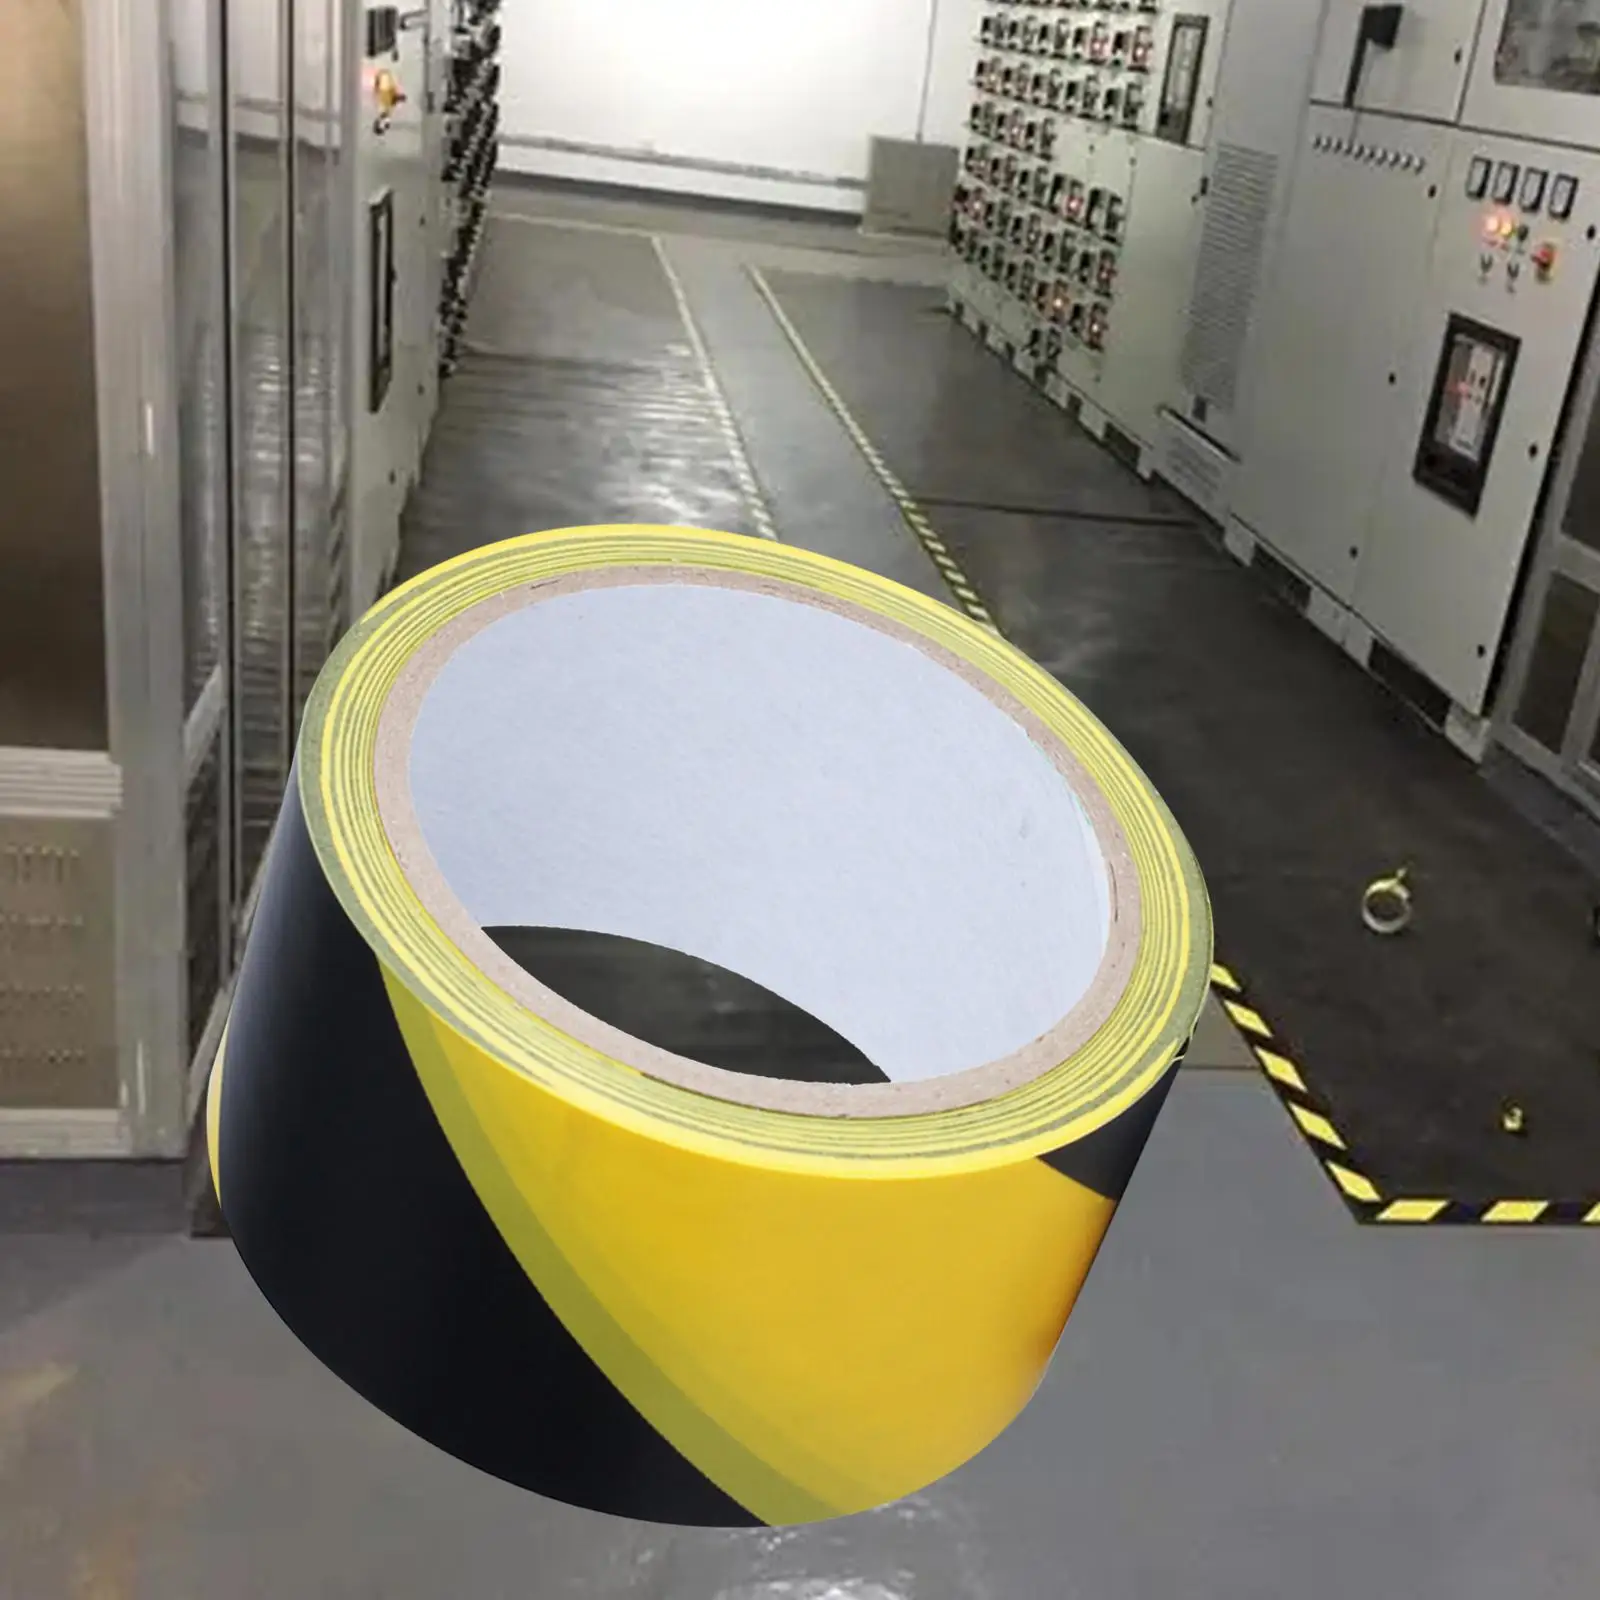 Warning Tape Identification Area PVC Hazard Warning Safety Stripe Tape for Equipment Stairs Factory Construction Pipes